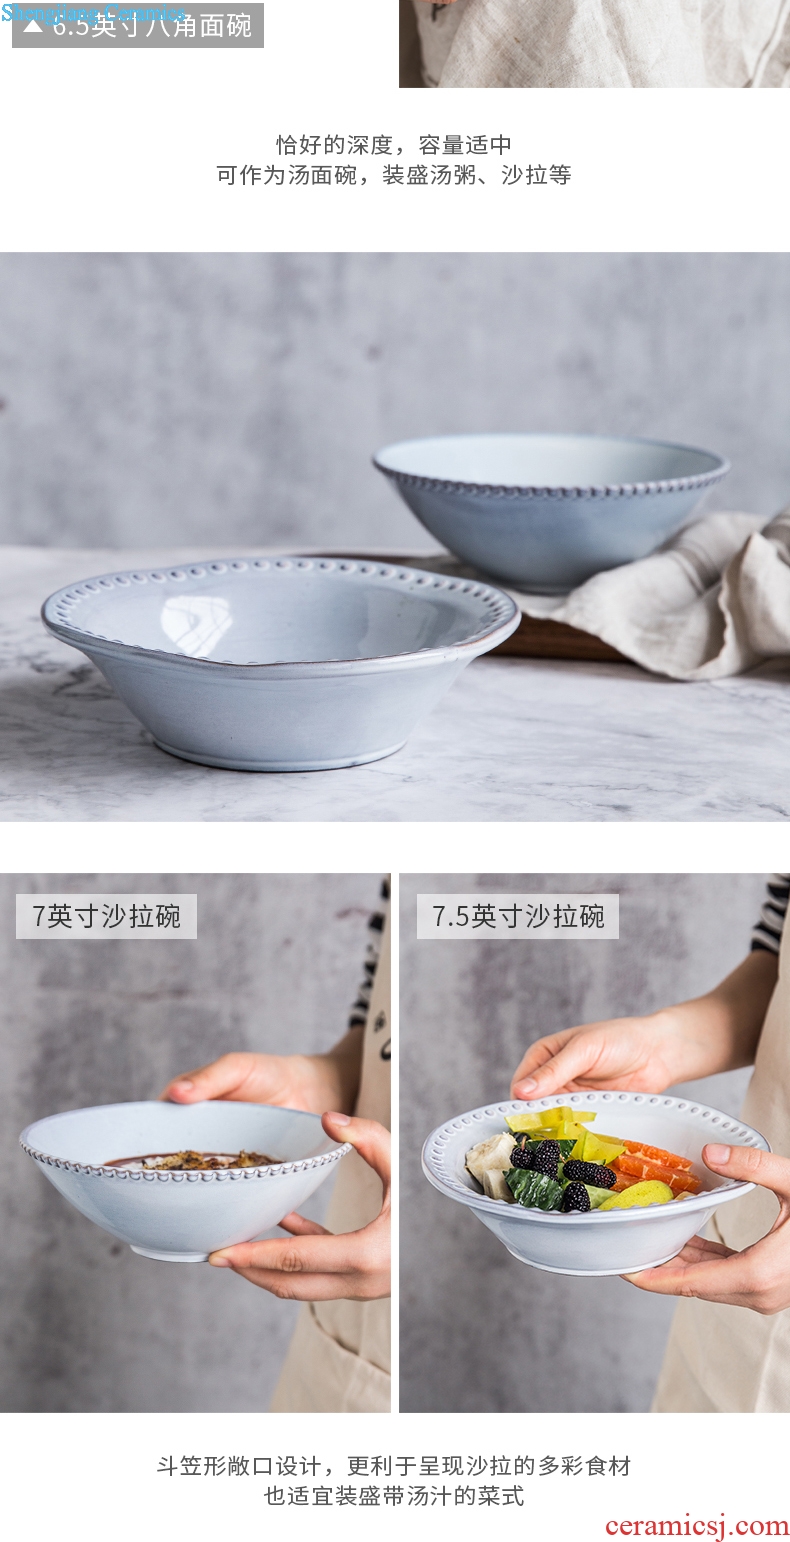 Million jia household ceramics rainbow noodle bowl creative emboss fruit salad bowl large soup bowl contracted jobs lance personality